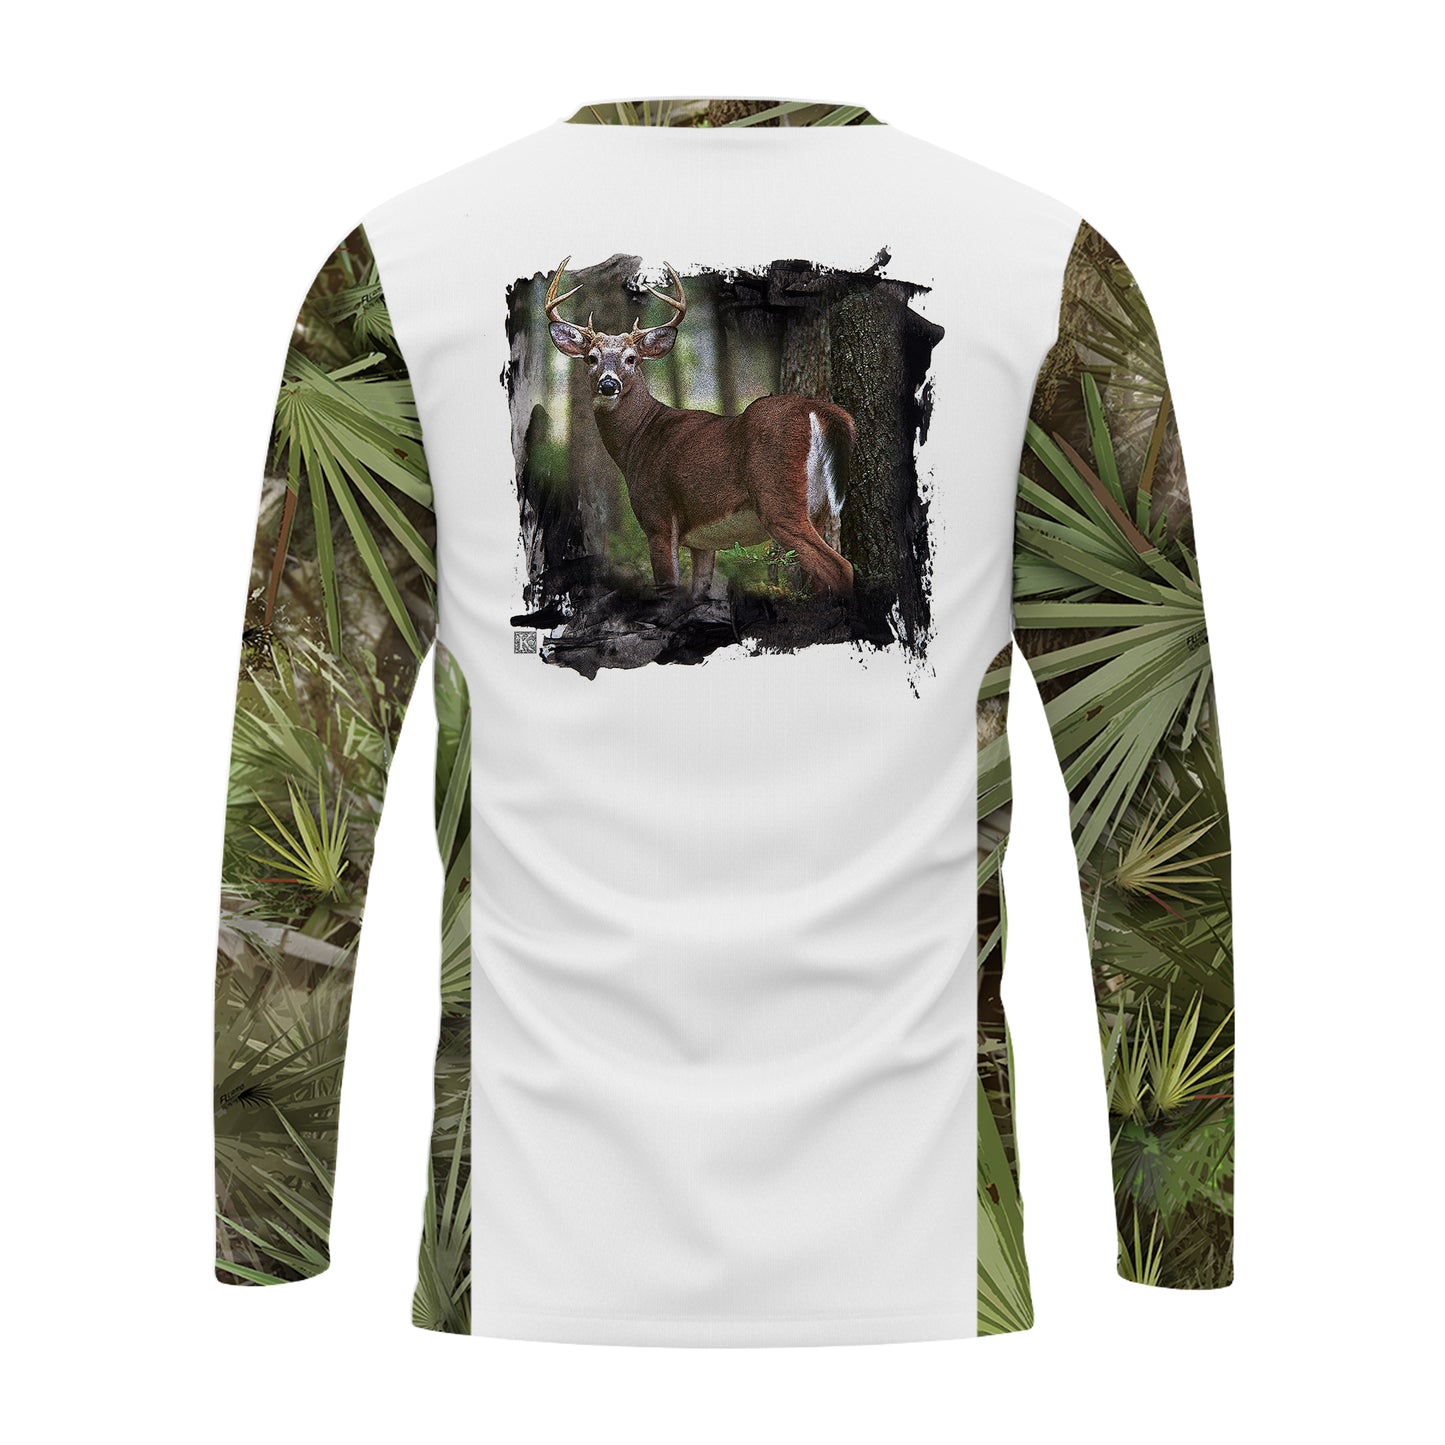 Men's Performance "The Youngster" Fl Camo Palmetto Long Sleeve